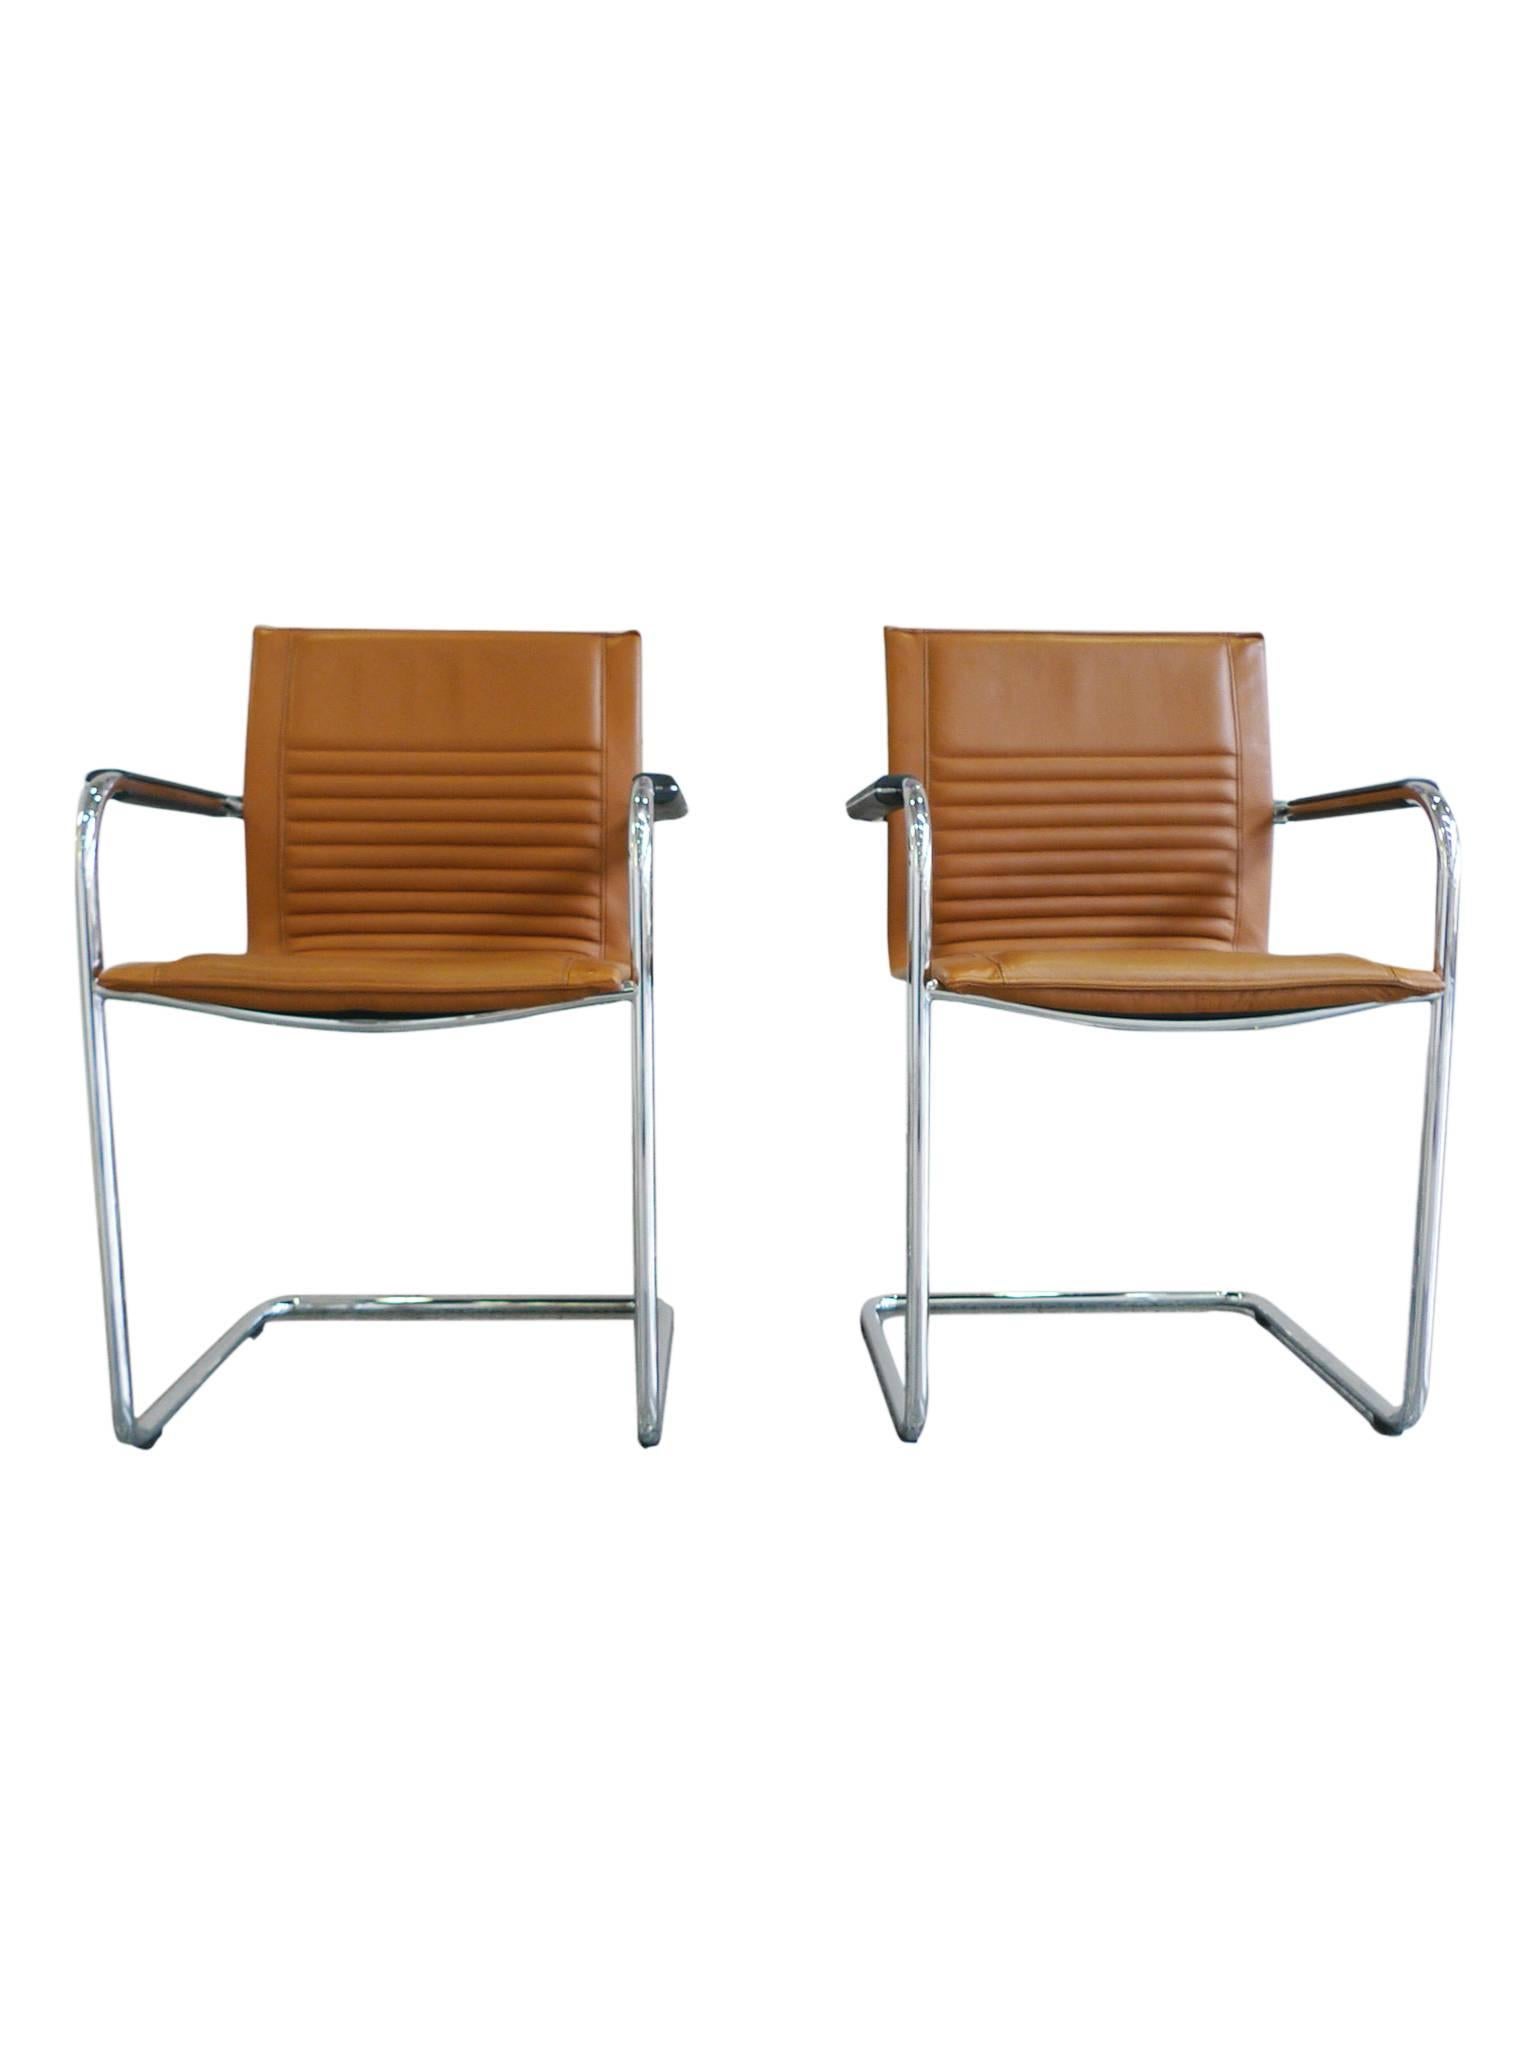 These two armchairs are designed by Haworth Design Studio. They are comprised of a cantilevered tubular chrome frame and leather upholstery. Their structure and technique are in the manner of Mart Stam and his contemporaries: minimal with straight